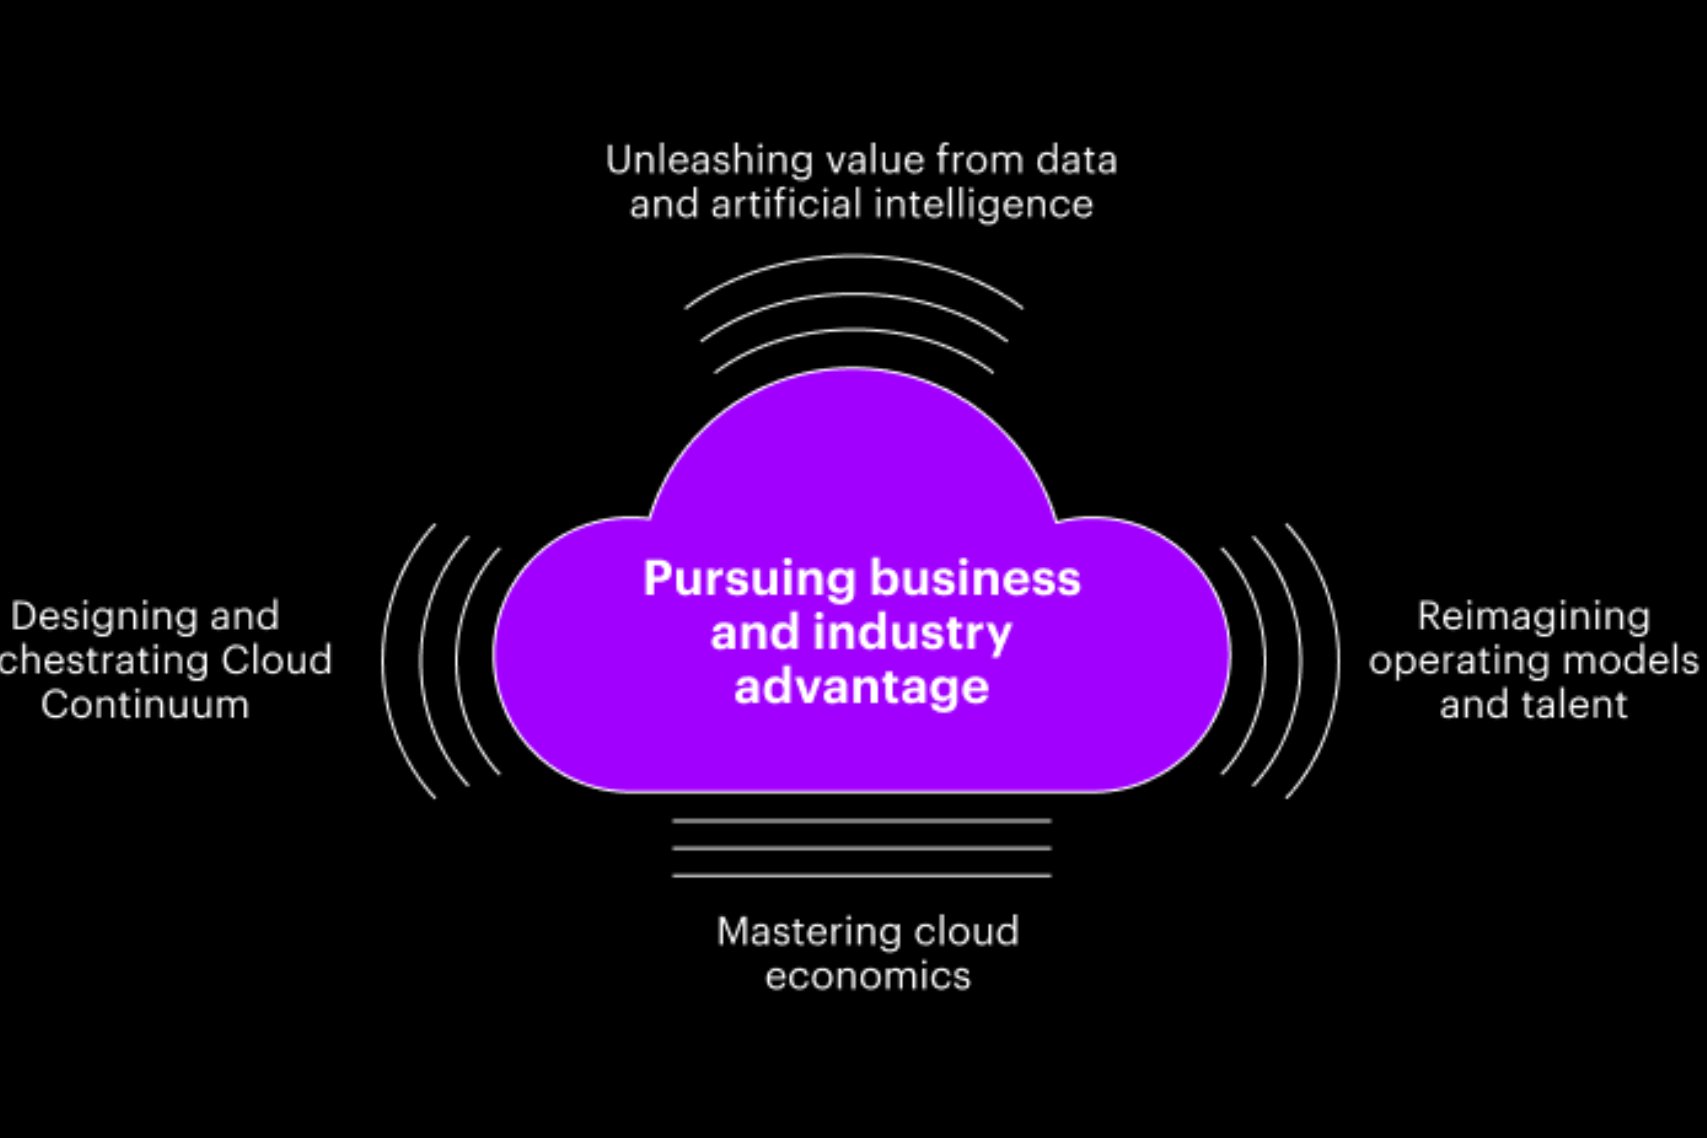 Five practices to help companies extract maximum value from the cloud: design and orchestrate the cloud continuum, master cloud economics, reimage operating module and talent, unleadh value from data and AI, and pursue business and industry advantage.